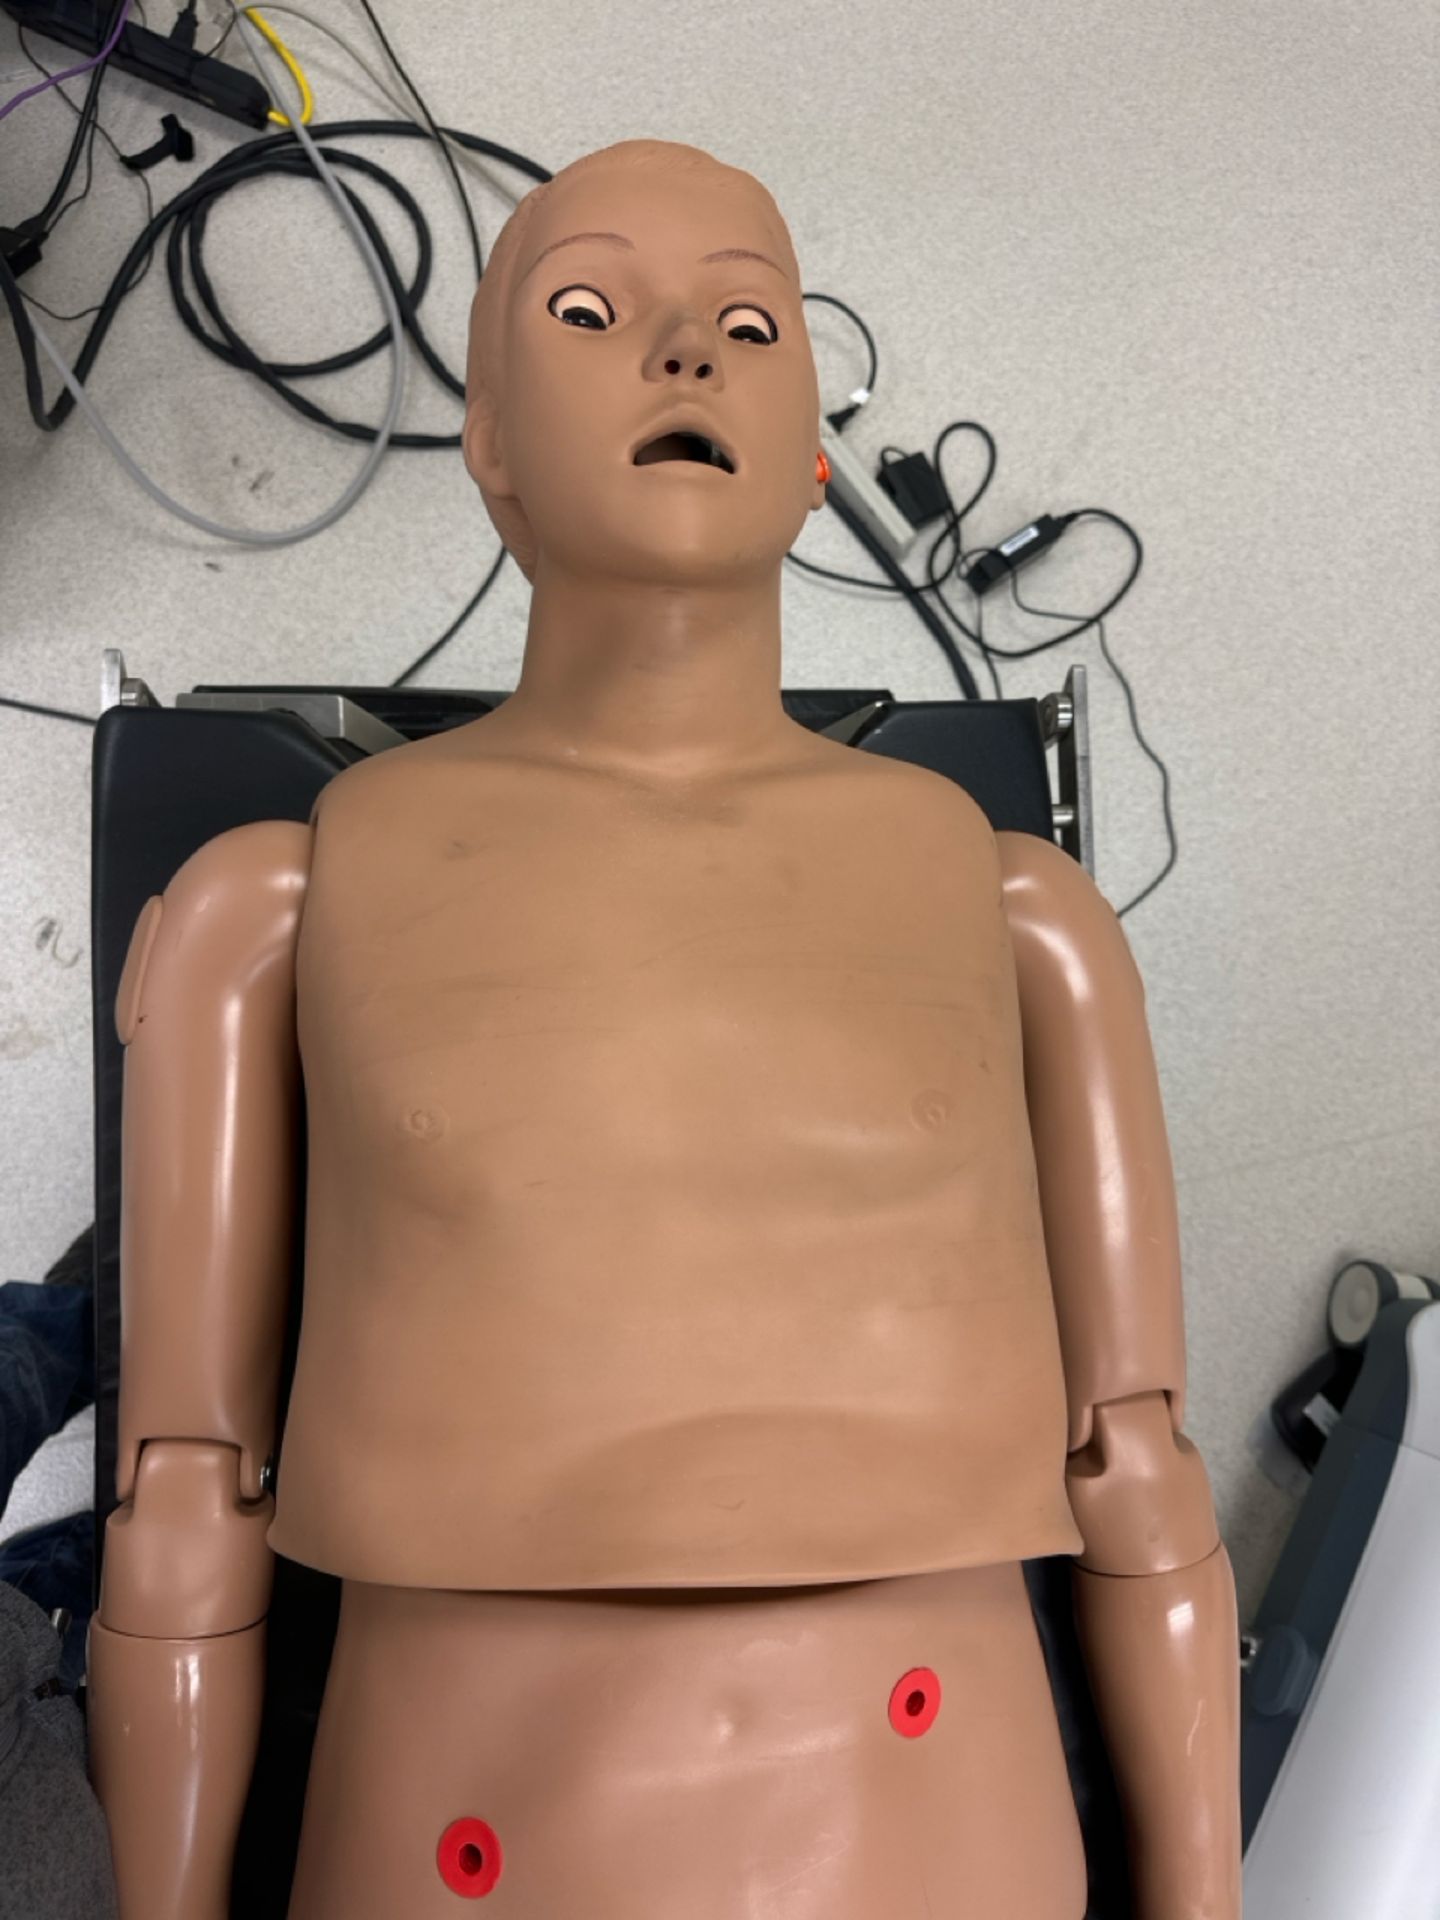 Universal Medical Human Mannequin - Image 3 of 6